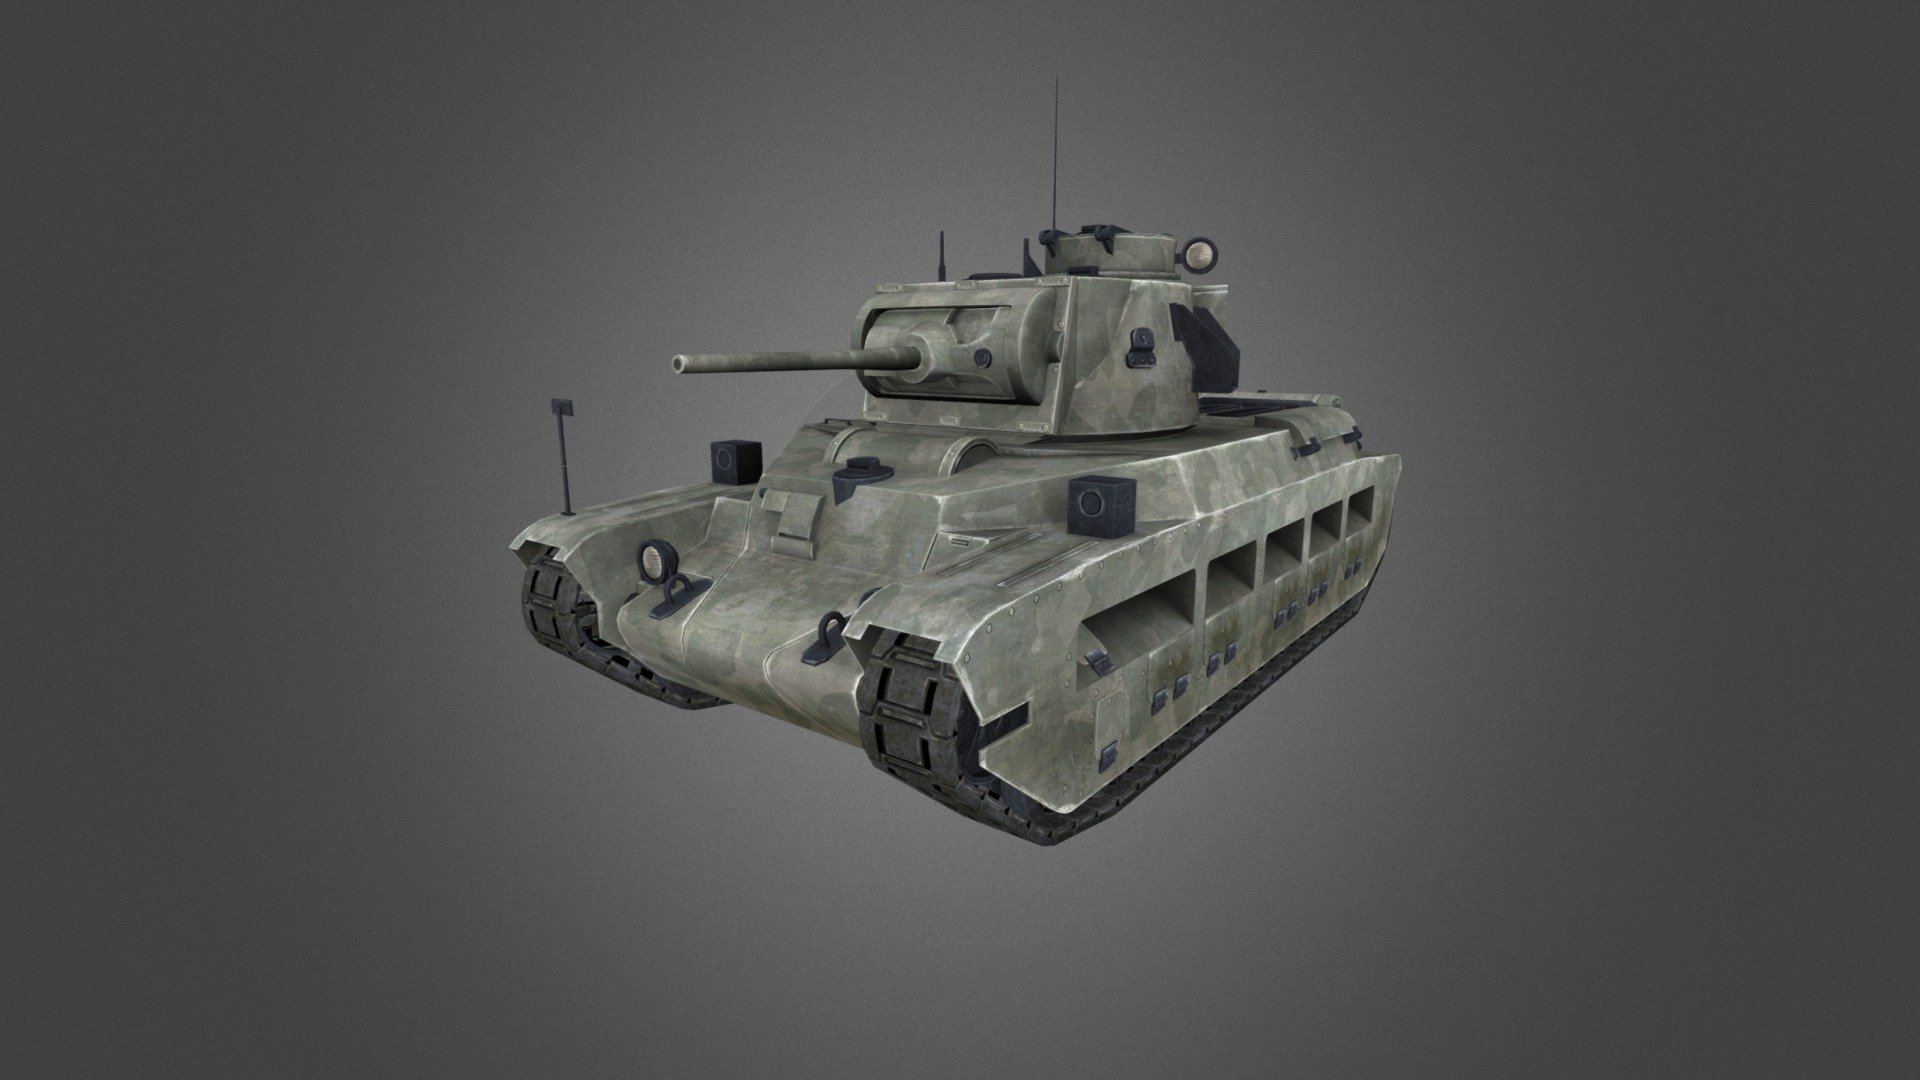 Game Ready low poly 3d model of A12 Matilda II Tank

Download: http://gamedev.cgduck.pro - A12 Matilda II Tank - 3D model by CG Duck (@cg_duck) 3d model